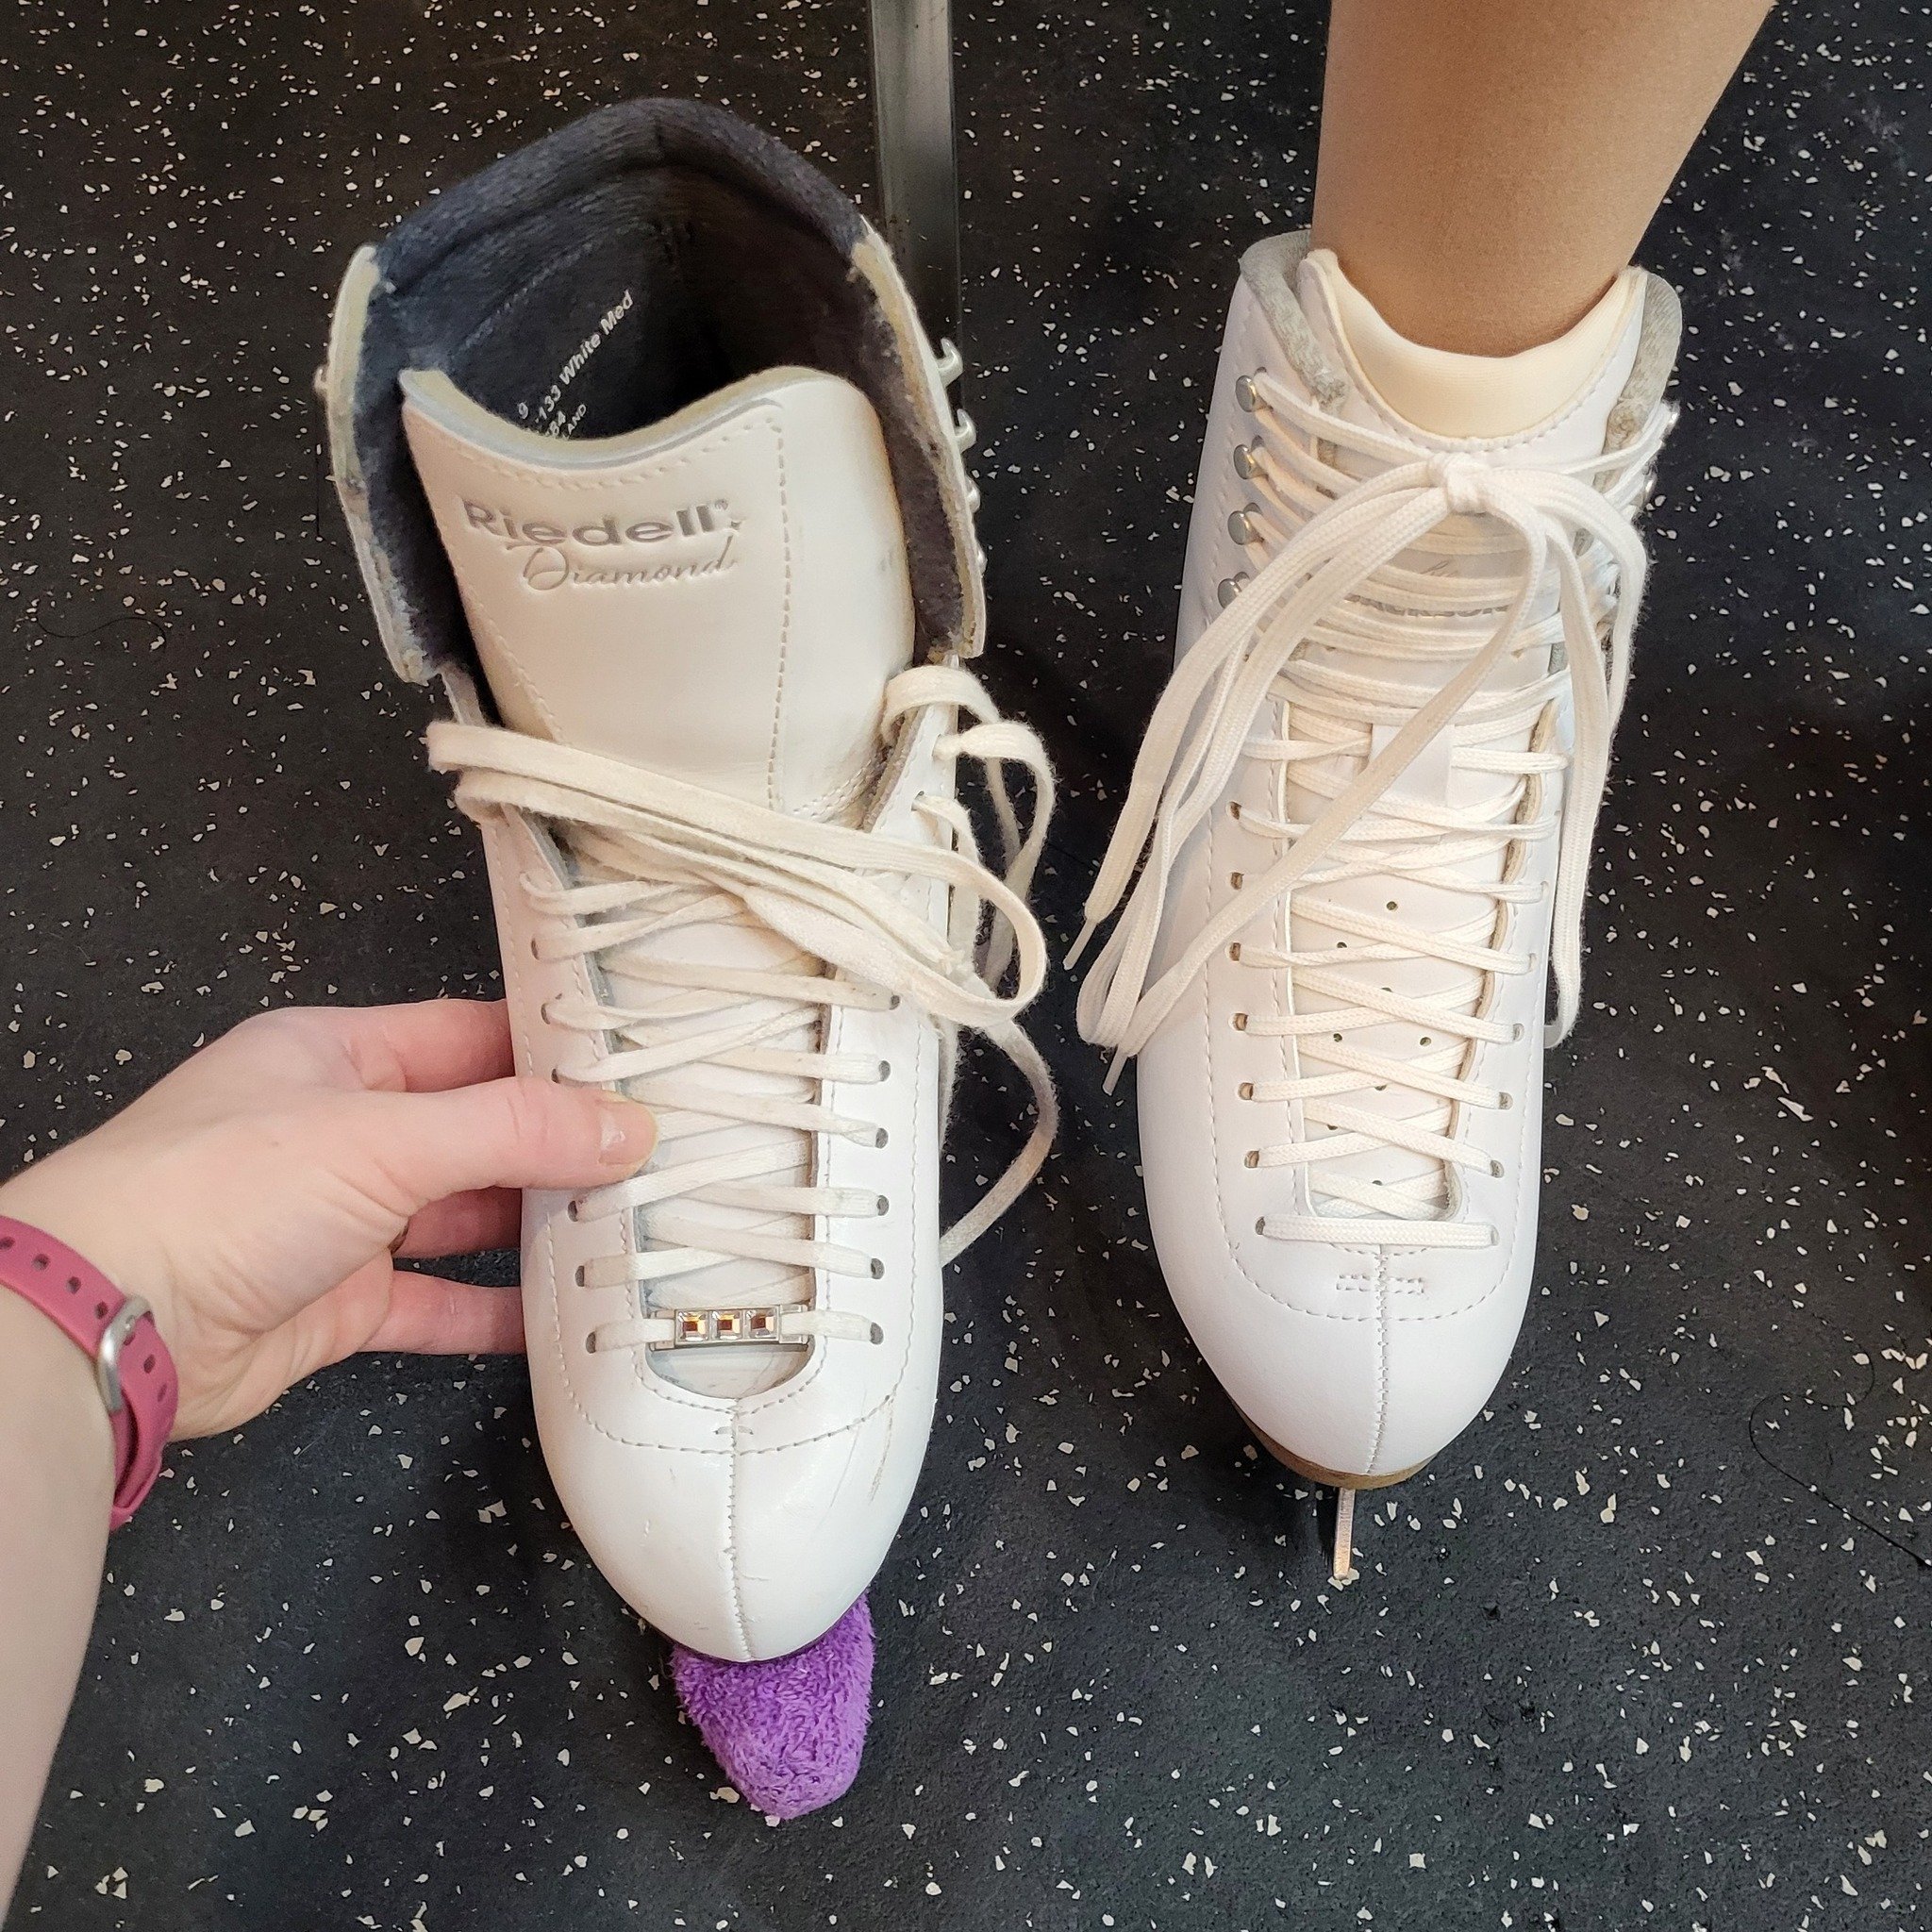 Can you say right-sizing?! 😱

This poor skater was suffering in skates THREE WHOLE SIZES TOO BIG ☠️

❌ No shame or hate to the brand

❌ No shame or hate to the parents

Mistakes like these are SO EASY to make when trying to buy skates secondhand or 